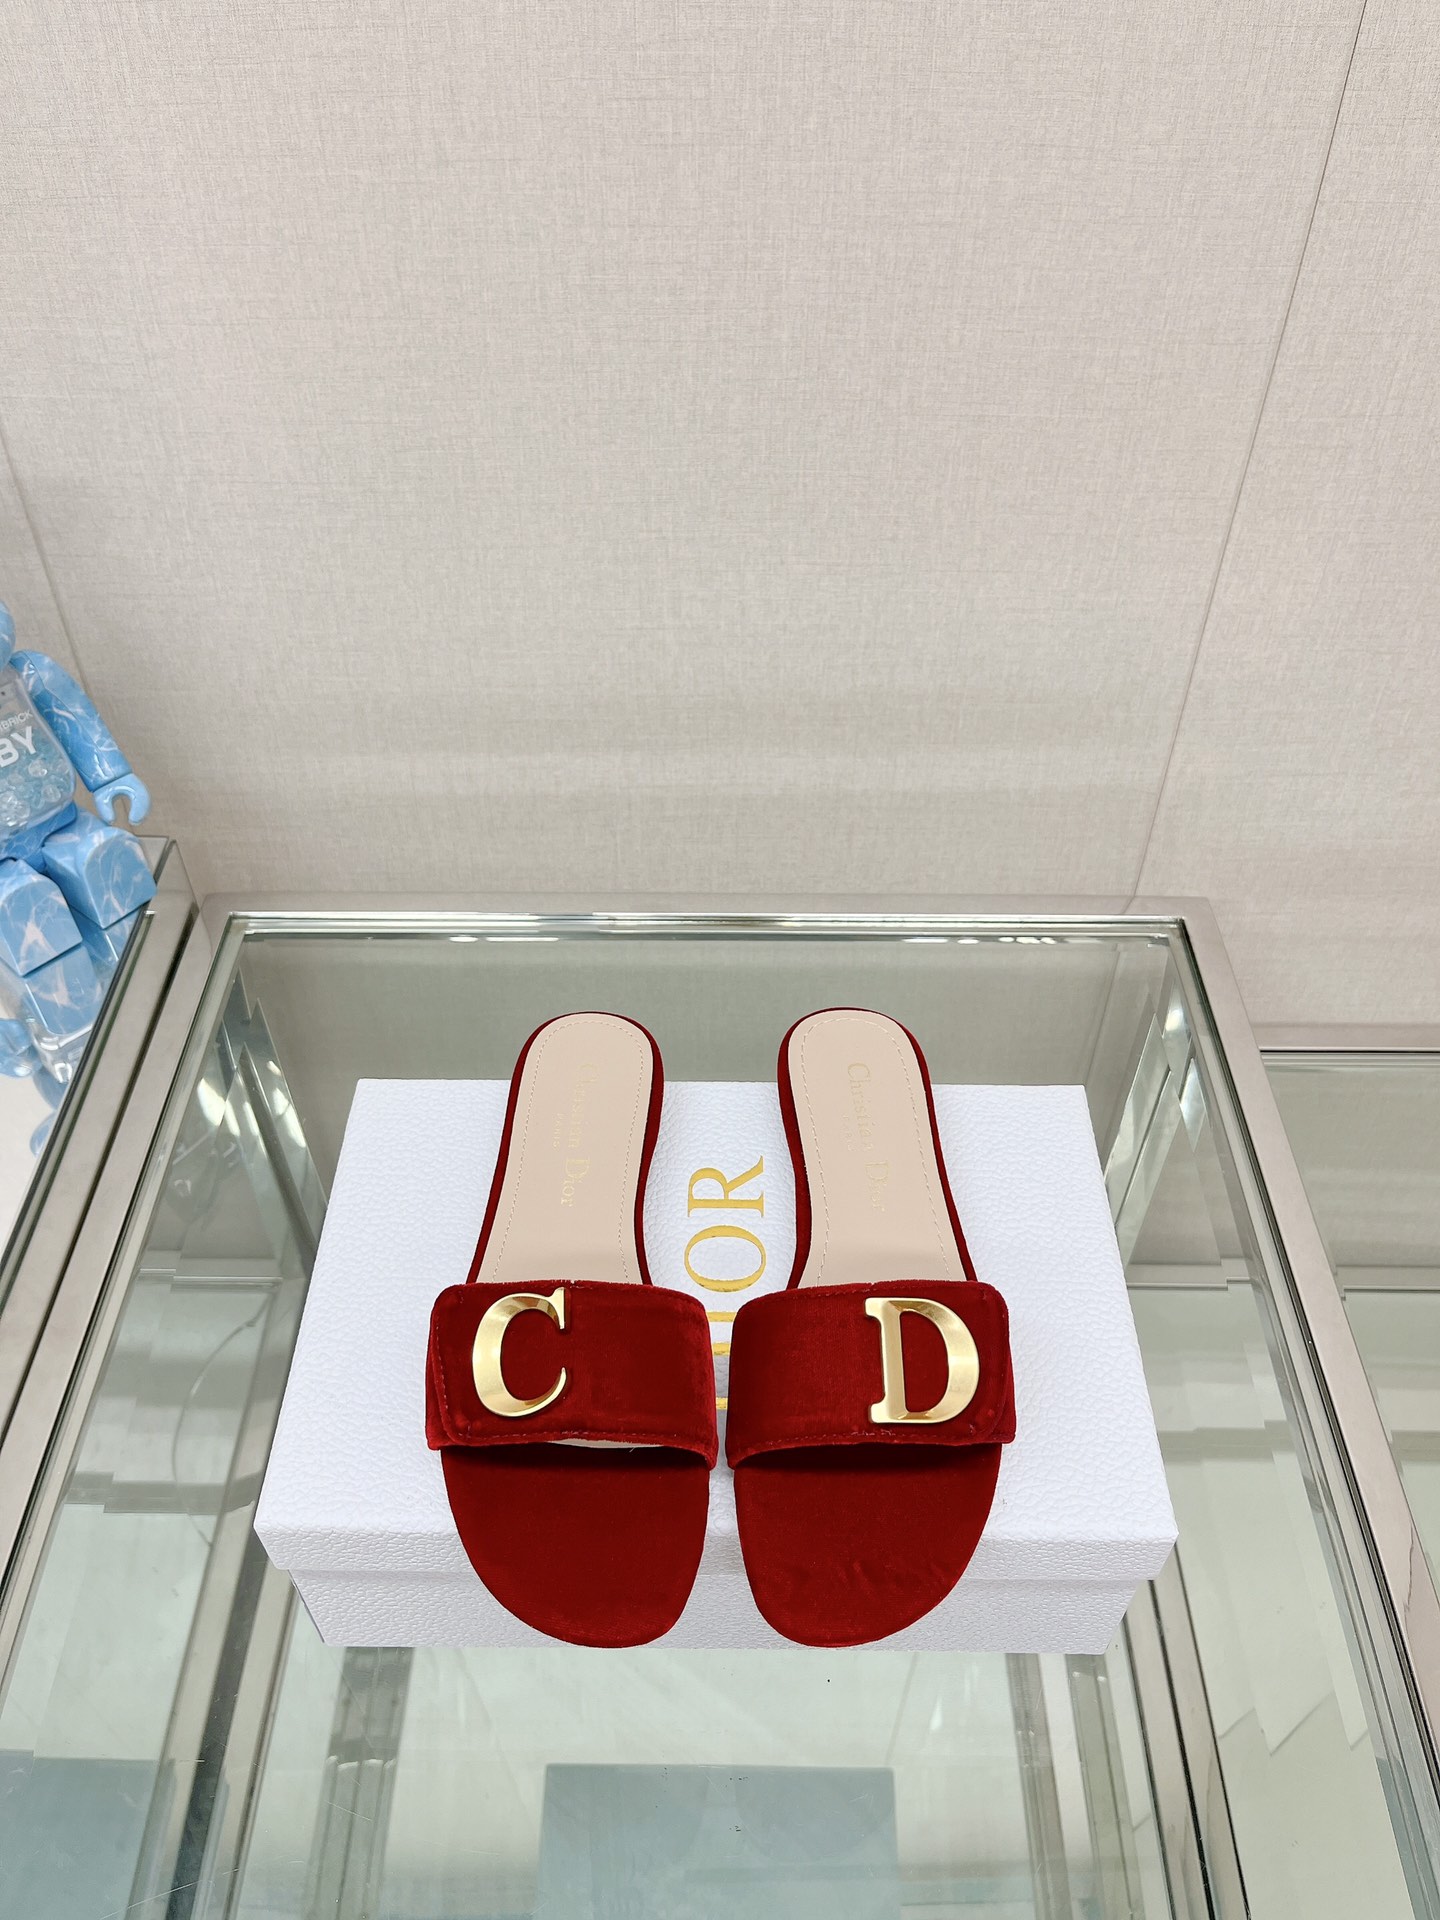 Dior Shoes High Heel Pumps Slippers Gold Cowhide Genuine Leather Patent Sheepskin Velvet Fall Collection Fashion